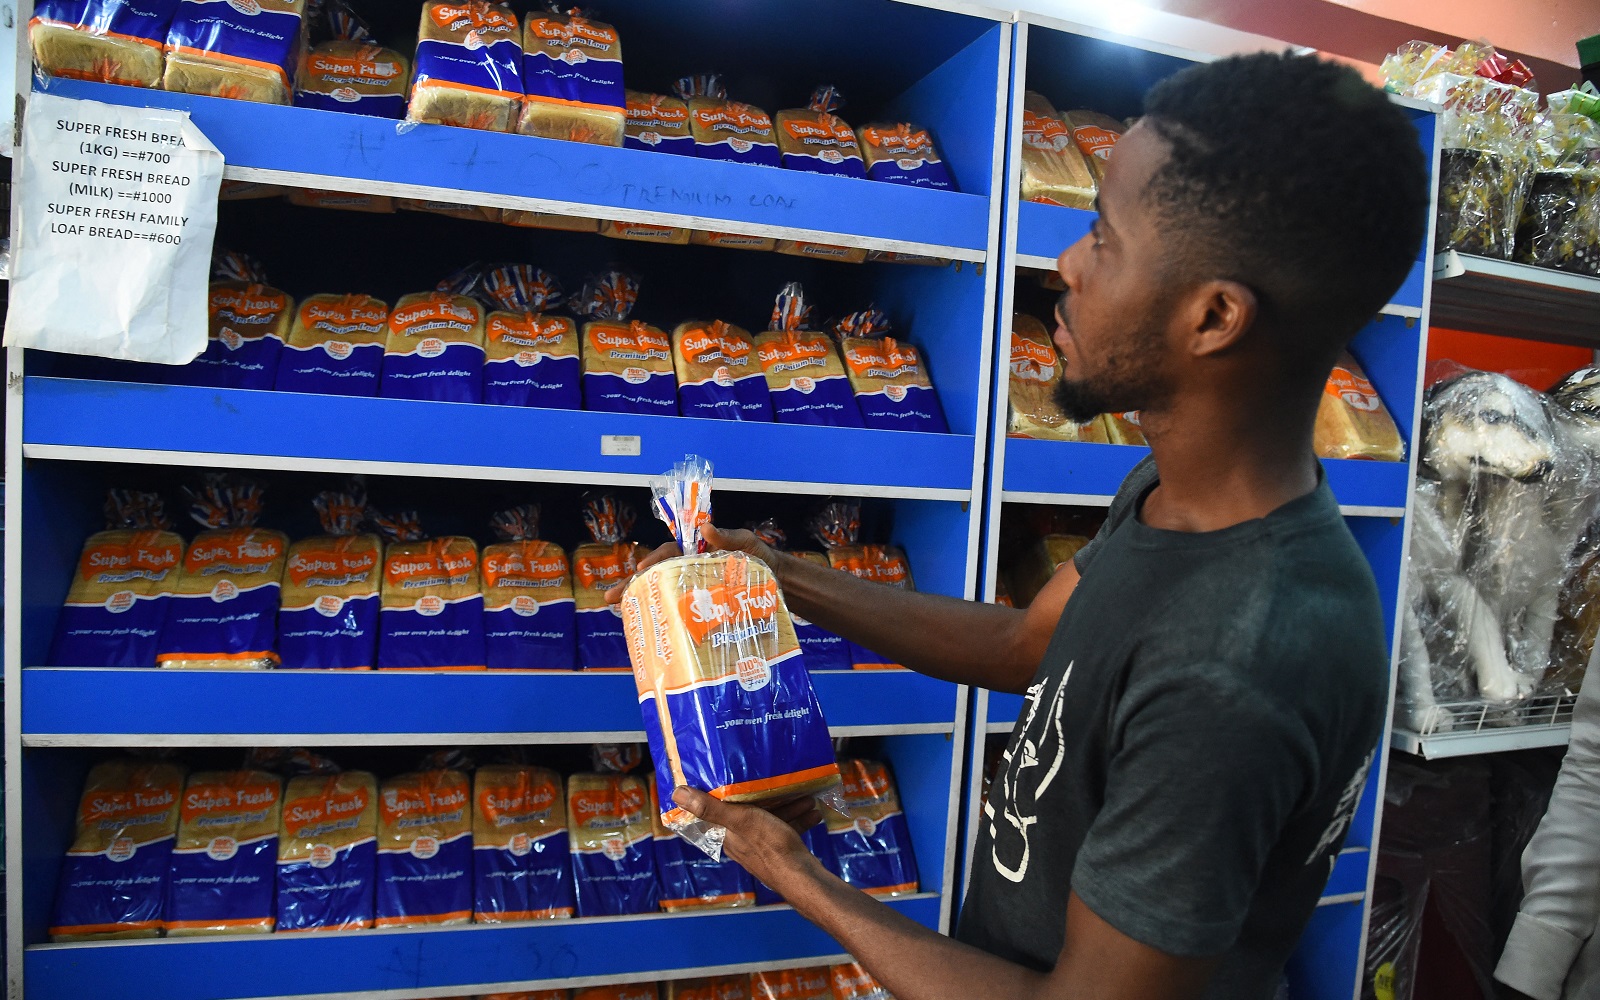 A man holds bread being sold at a high price in a supermarket in Lagos, Nigeria on March 15, 2022.